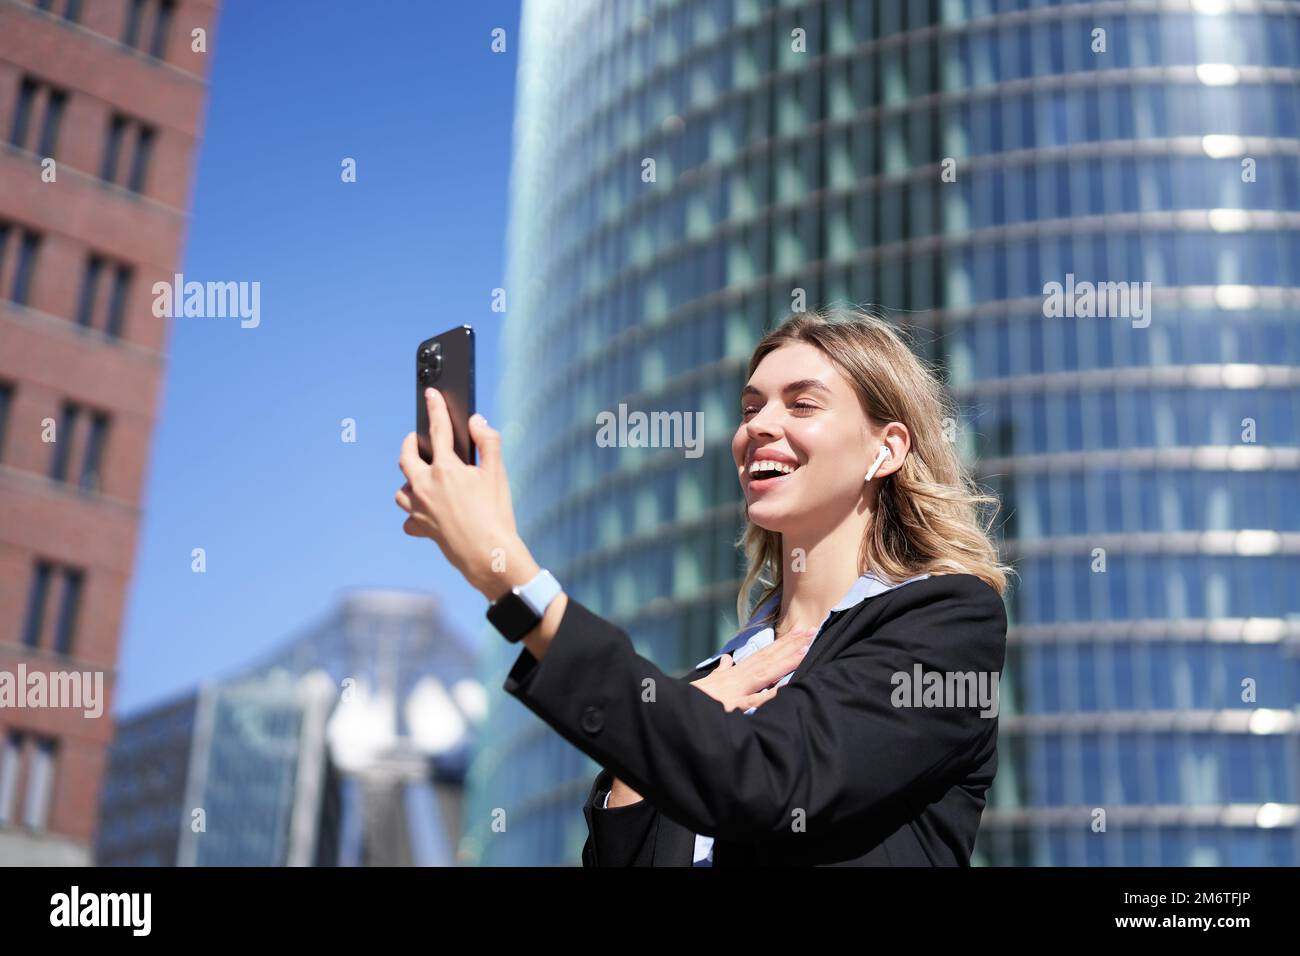 Portrait of smiling corporate woman video call on street, holding mobile phone and waving at smartphone camera, wearing suit Stock Photo